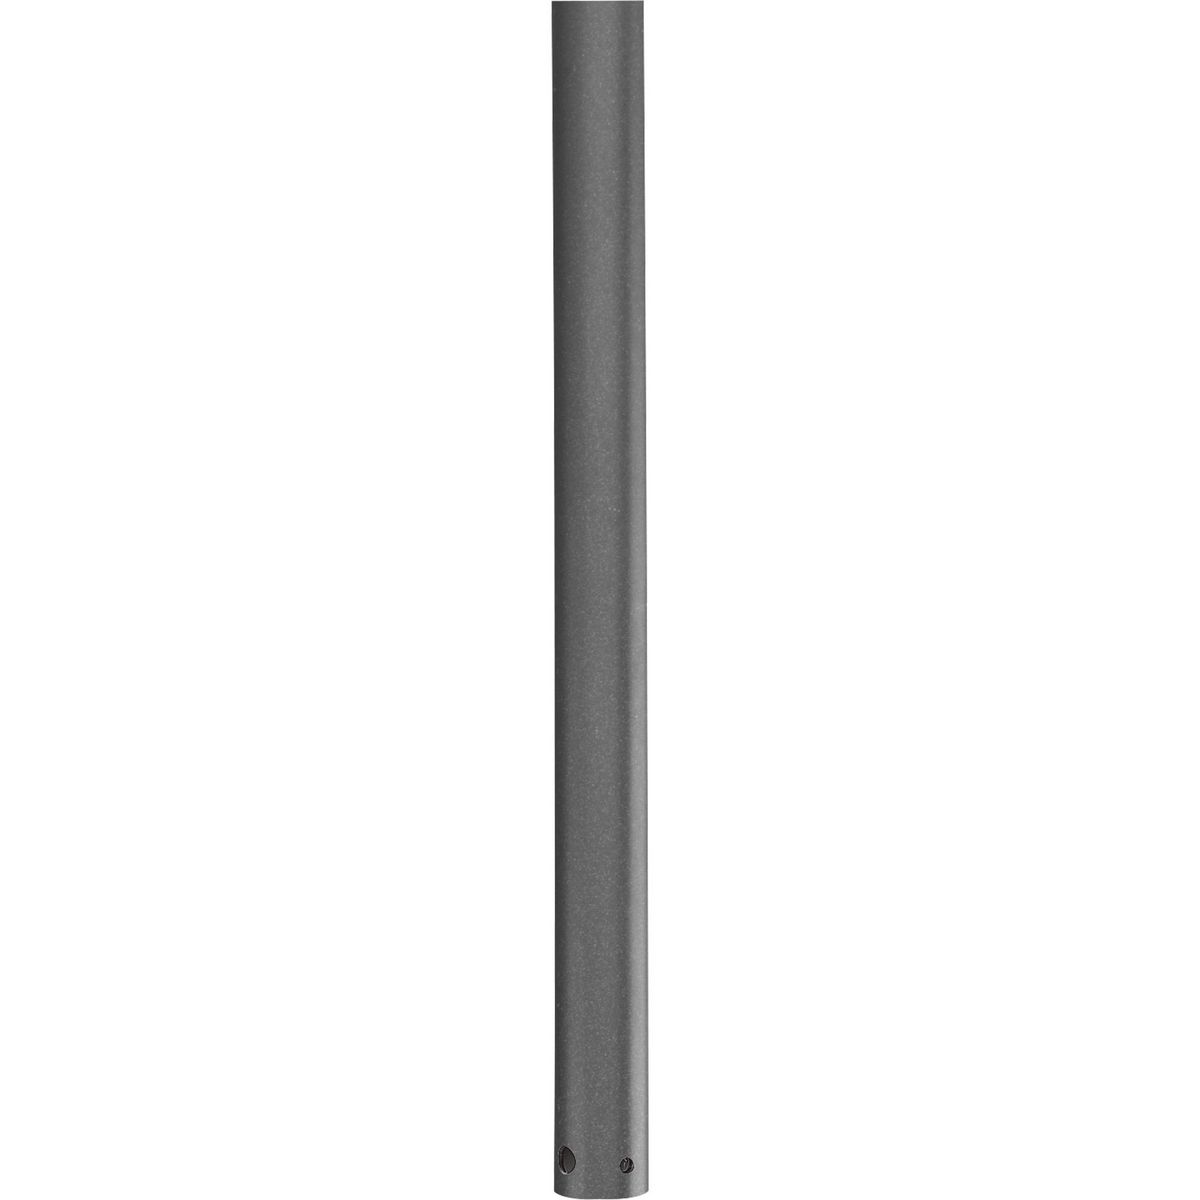 3/4 In. x 24 In. downrod for use with any Progress Lighting ceiling fan. Use of a fan downrod positions your ceiling fan at the optimal height for air circulation and provides the perfect solution for installation on high cathedral ceilings or in great rooms. Refer to the selection guide for recommended downrod lengths based upon your ceiling height. Graphite finish.